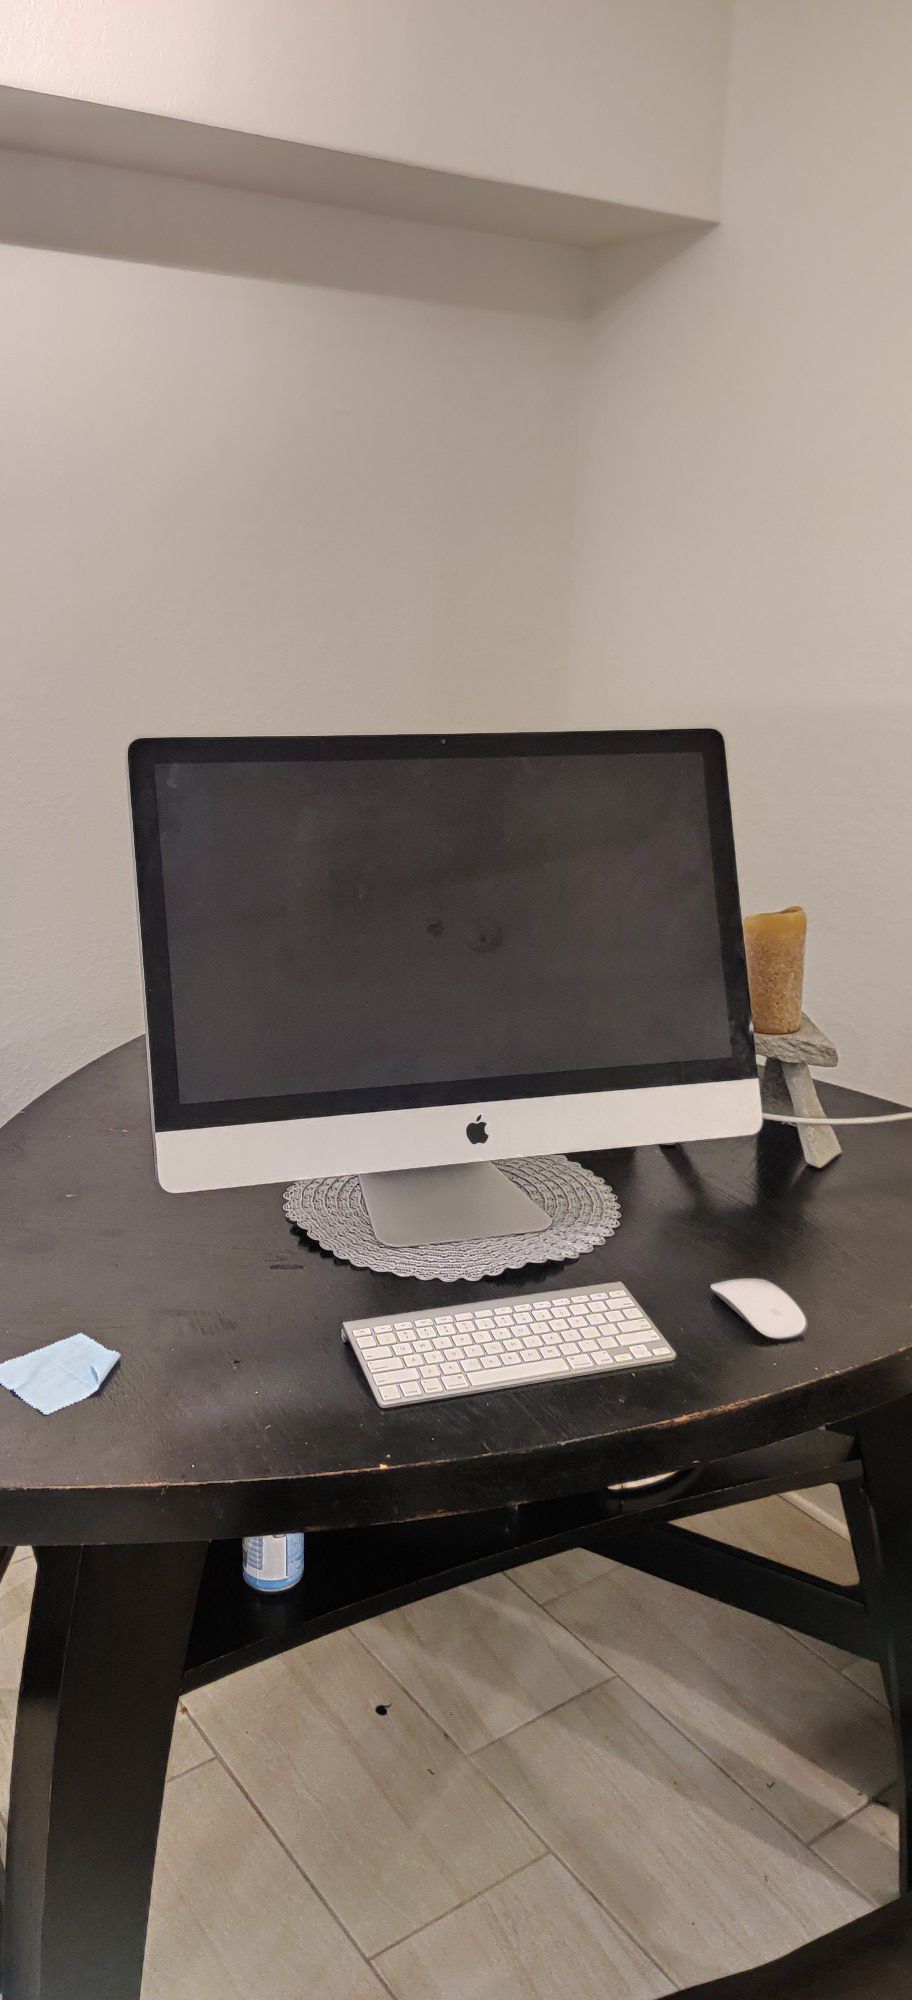 27-inch iMac (Mid 2011) runs like new, comes with Magic Mouse & Apple Wireless Keyboard